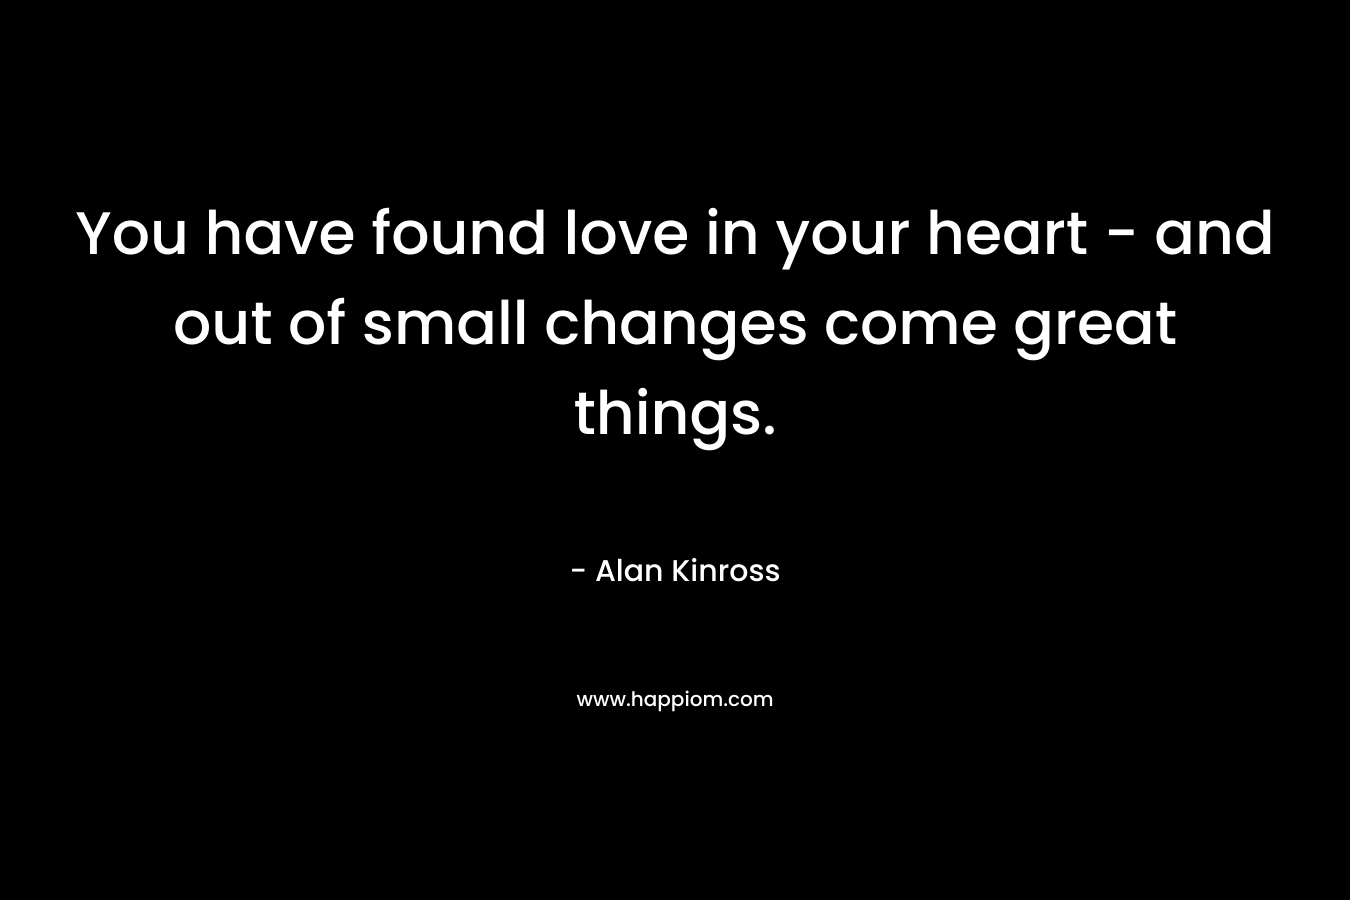 You have found love in your heart – and out of small changes come great things. – Alan Kinross